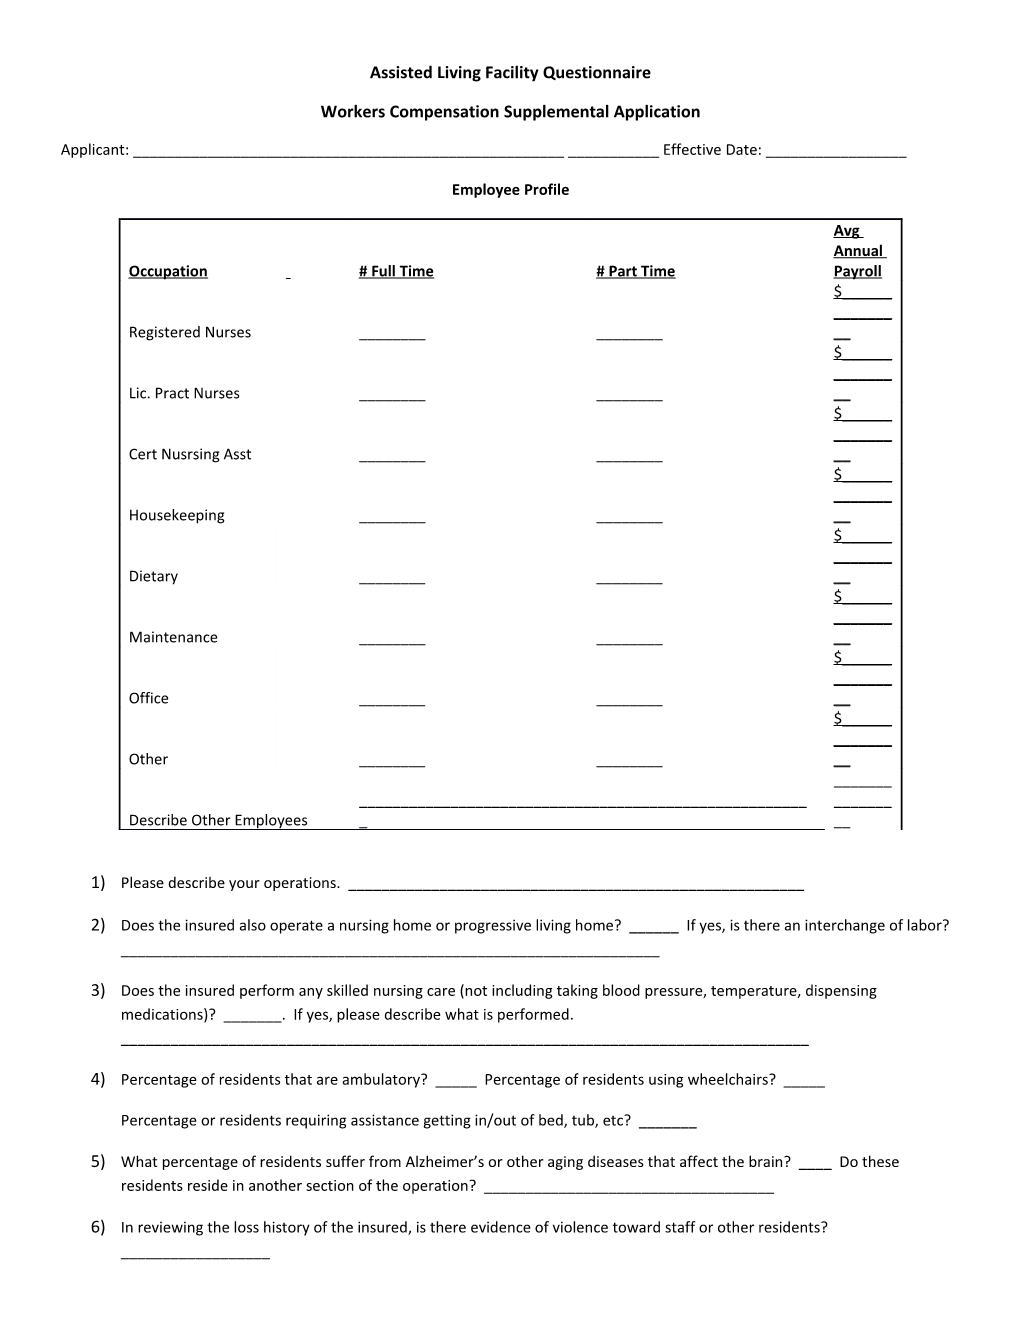 Assisted Living Facility Questionnaire